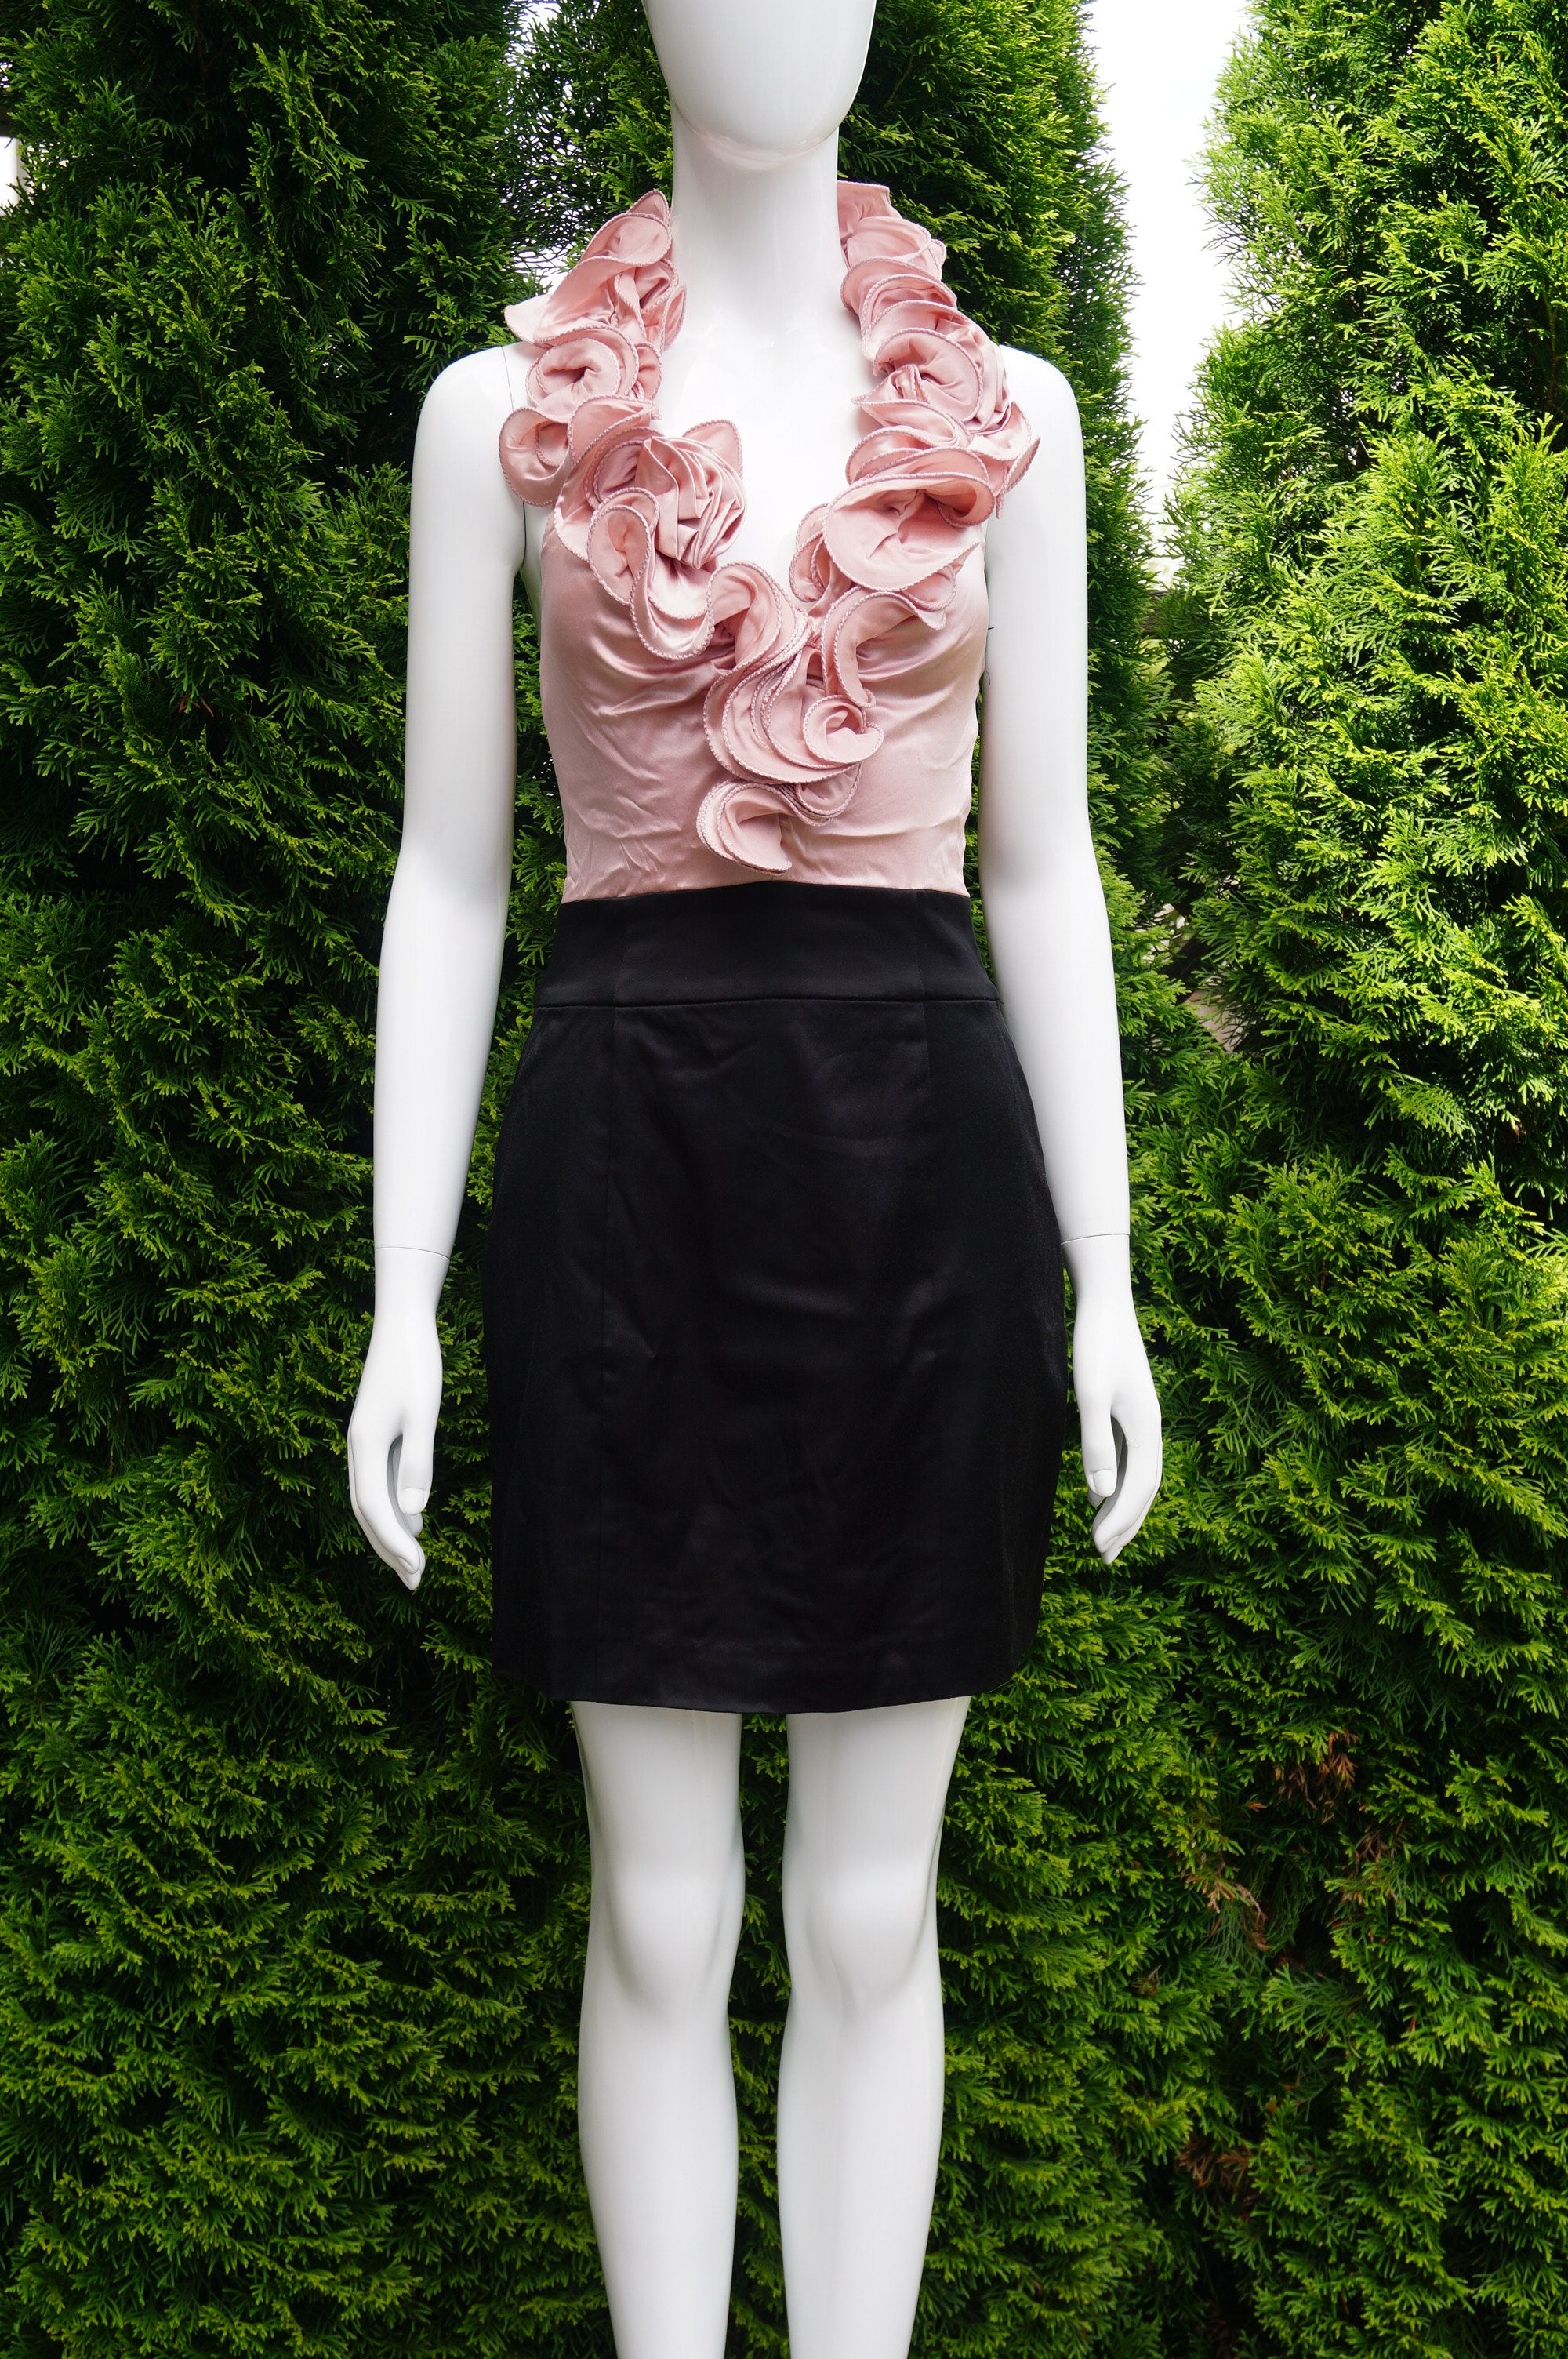 Bebe 3D Ruffle Flower V-Neck Pink Dress and Pencil Black Skirt, This shuffle v-shaped halted neck dress is perfect for both a fun night out and a work social event. Length 36 inches, breast 29 inches, waist 26 inches., Pink, Black, women's Dresses & Rompers, women's Pink, Black Dresses & Rompers, Bebe women's Dresses & Rompers, Pink and Black 3D Ruffle Flower Halted V-Neck Dress, Dress with Pink V-Neck Ruffle Top and Pencil Skirt